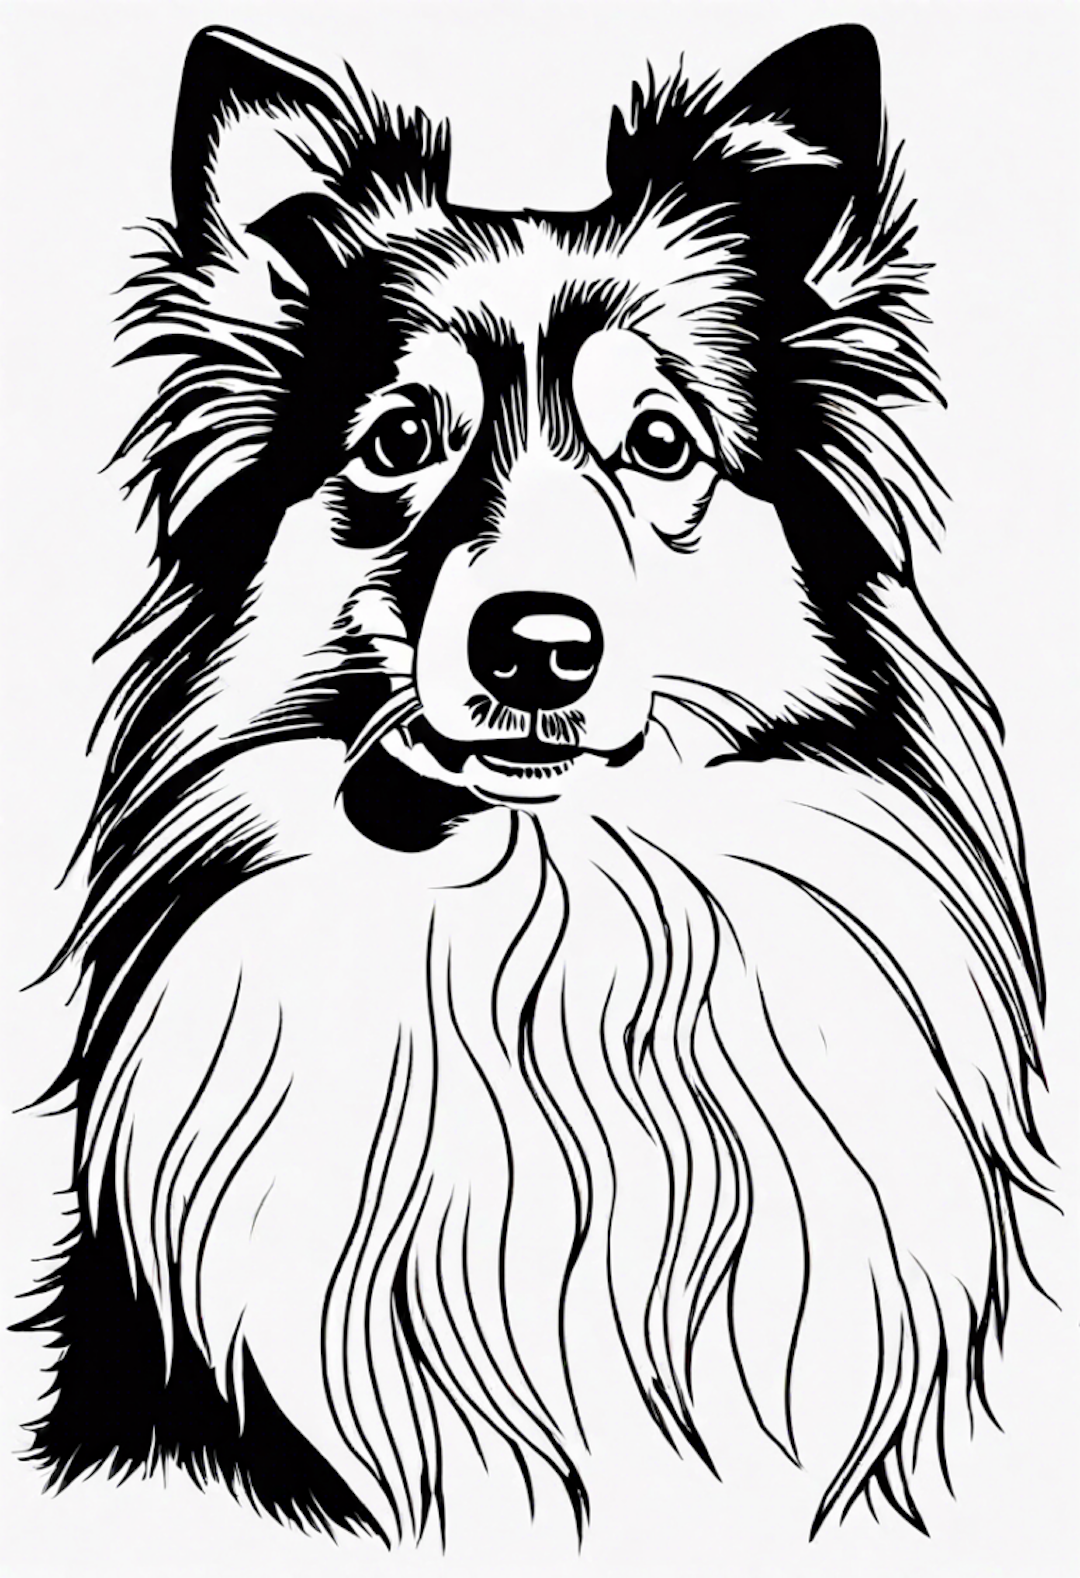 Lassie the Loyal Collie Coloring Page coloring pages